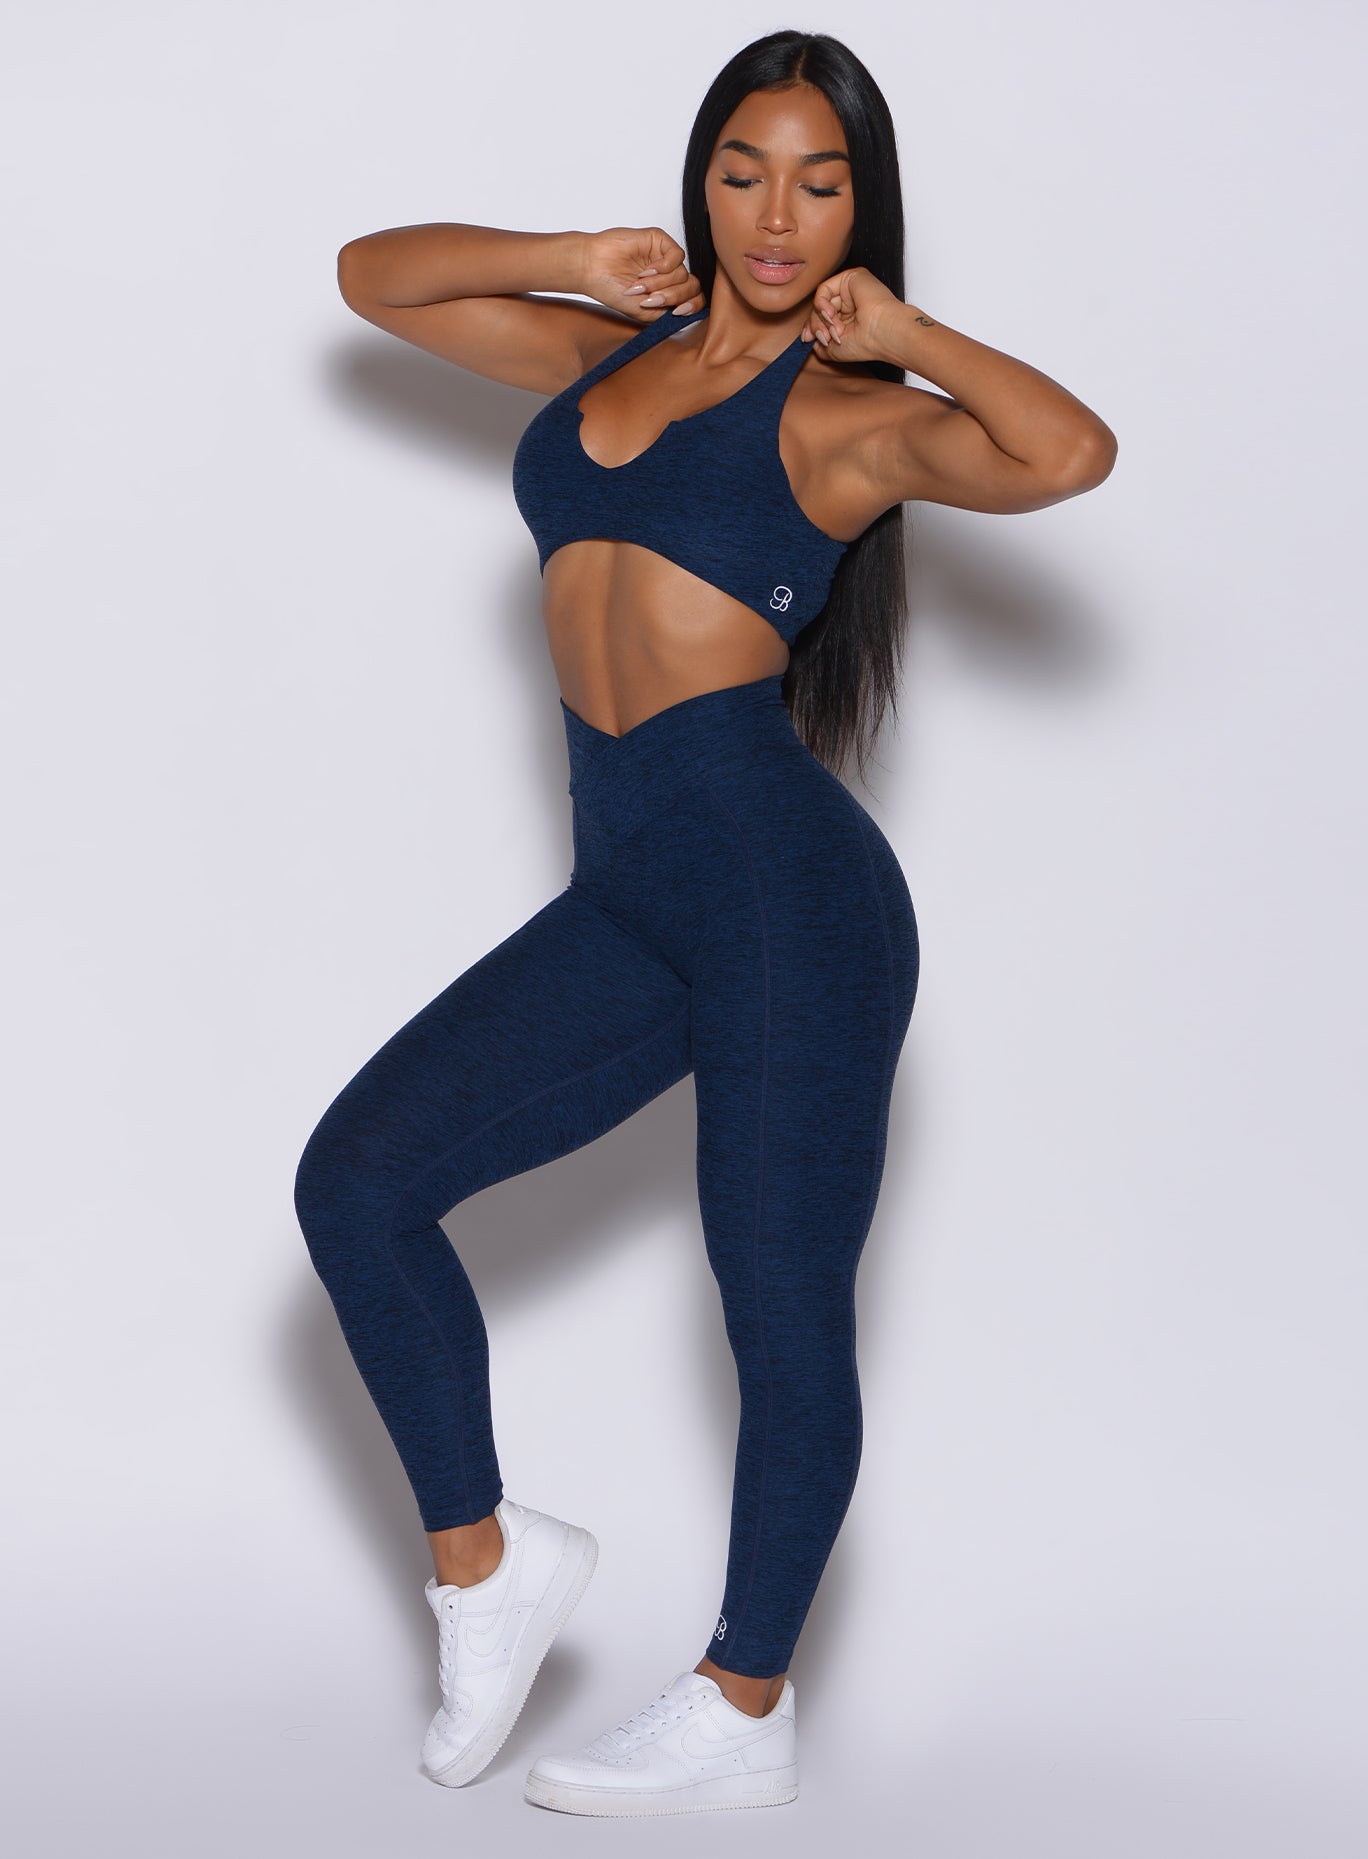  profile view of a model posing in our Brazilian Contour Leggings in sapphire blue color and a matching bra